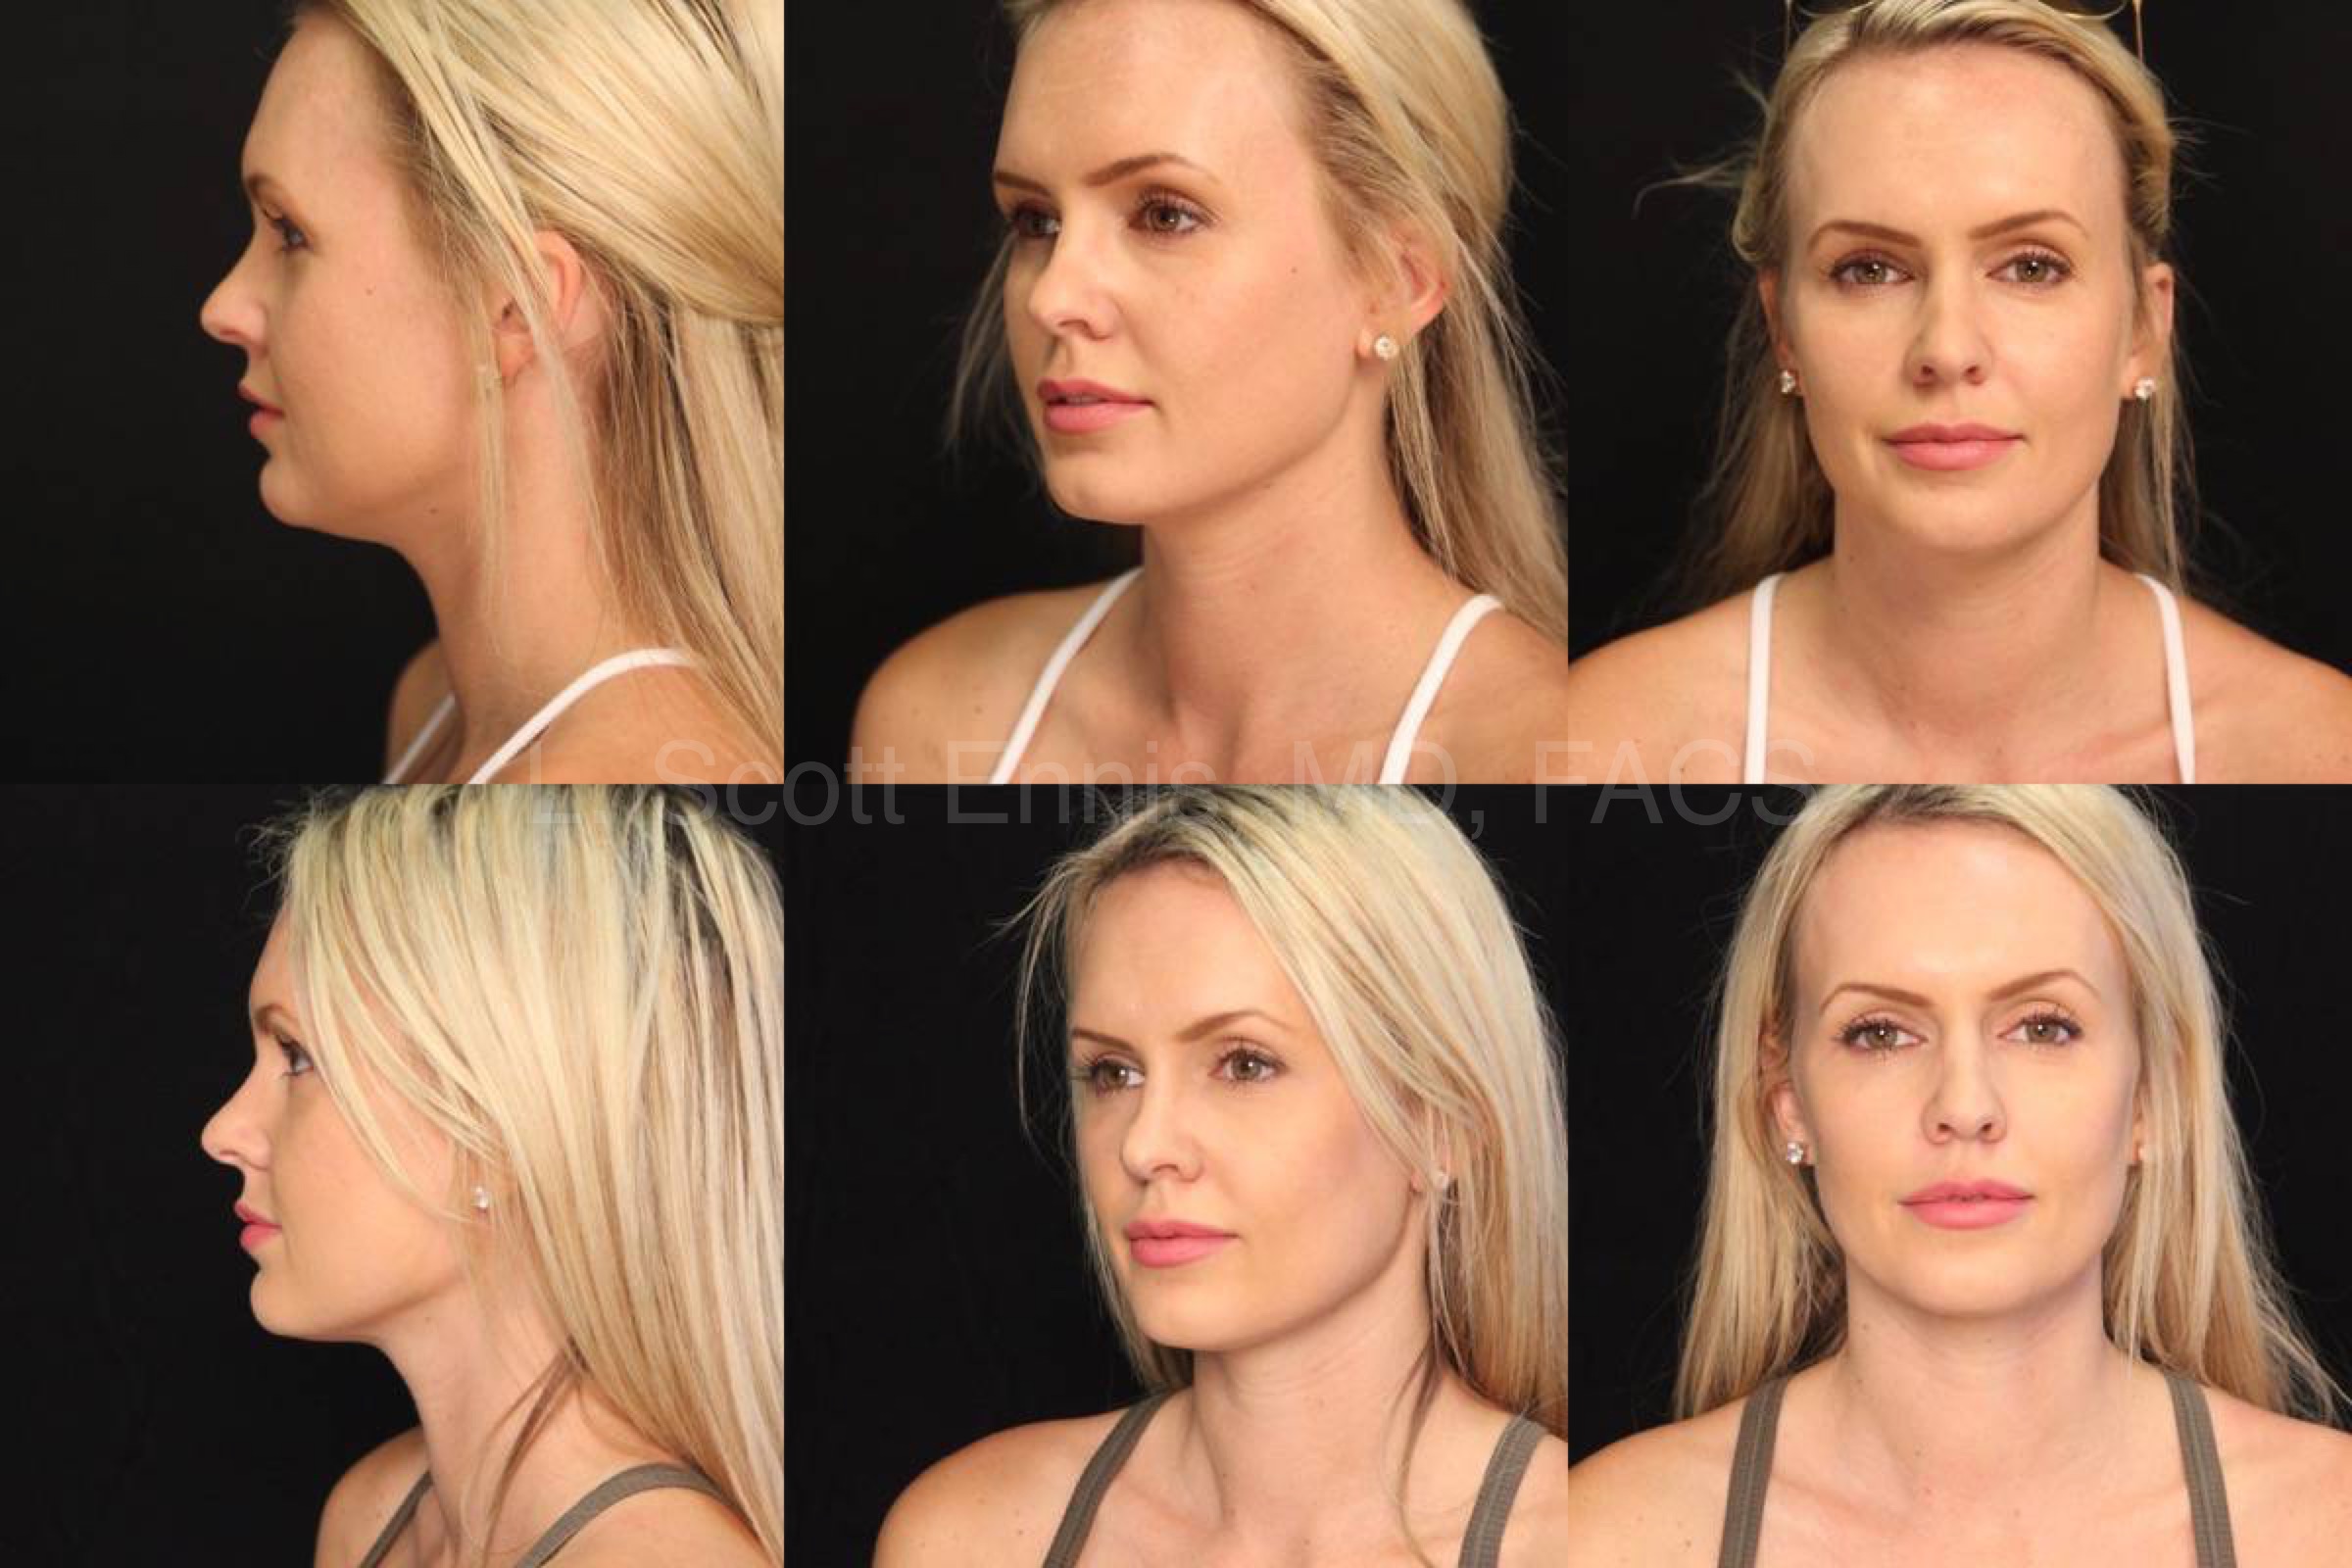 Kybella to the neck 32 yof Before and After Ennis Plastic Surgery Palm Beach Boca Raton Destin Miami Fort Lauderdale